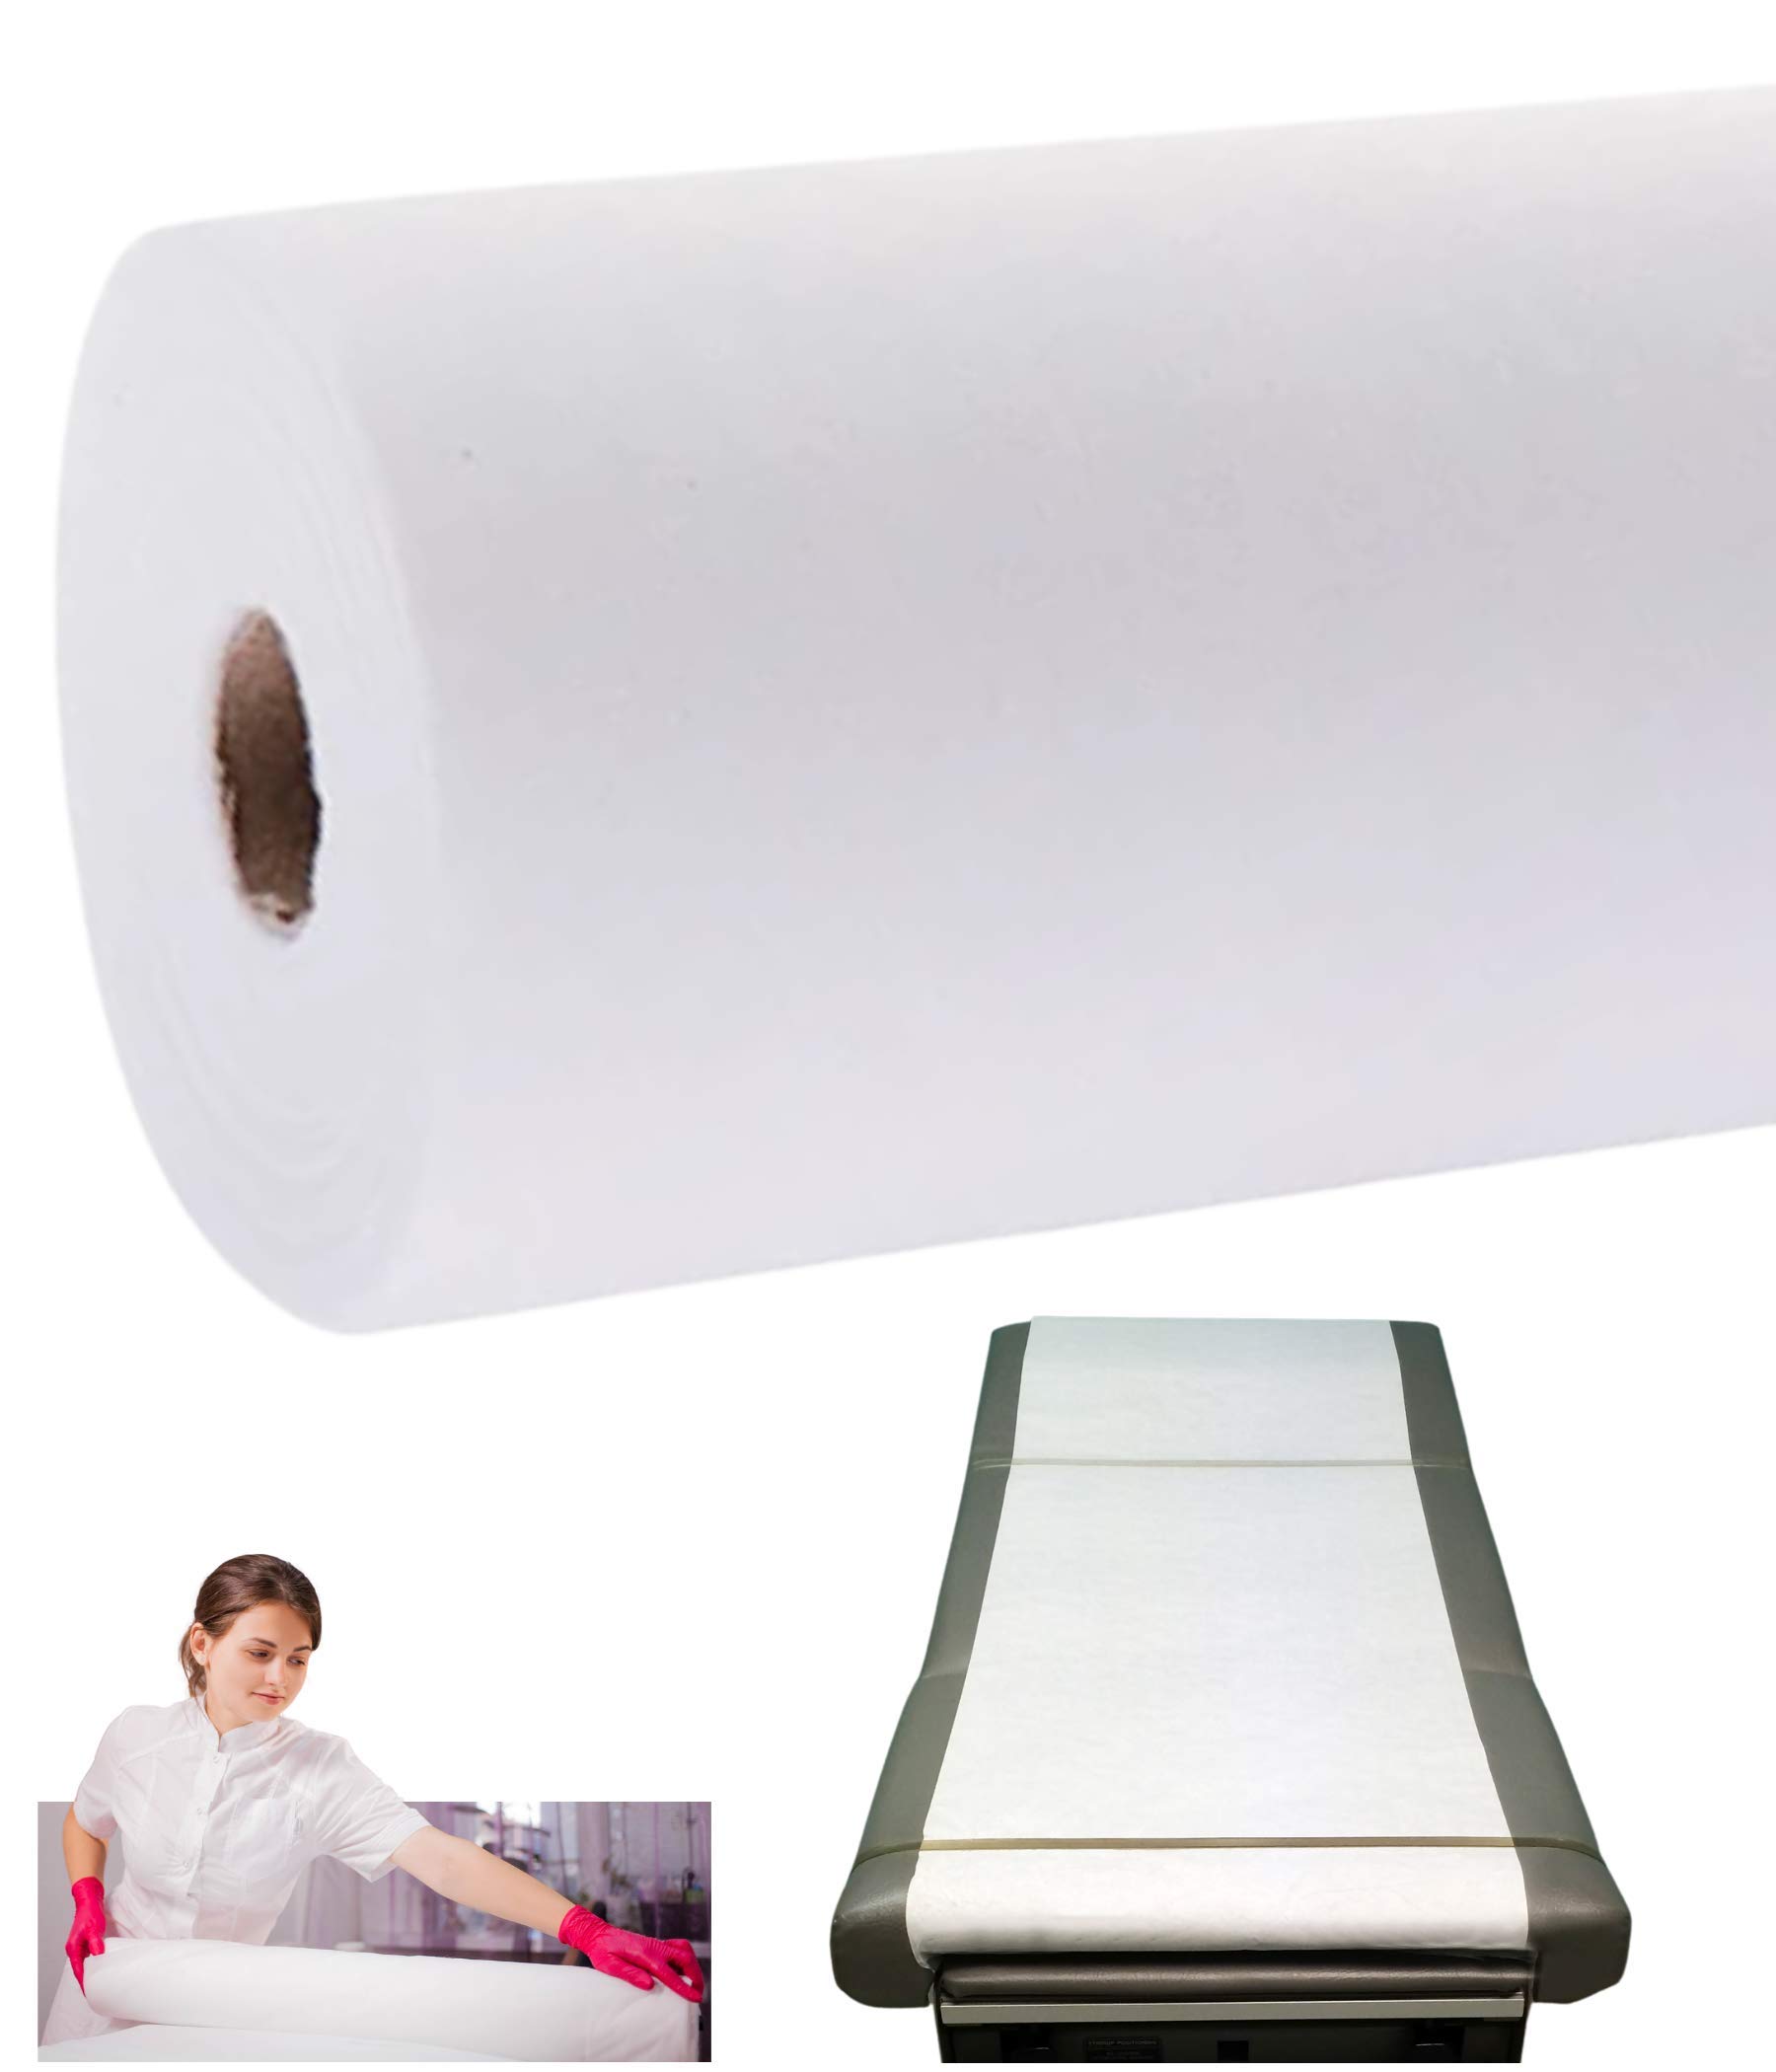 SavBin Disposable 31"x 70" Non-Woven Perforated Extra-Thick Bed & Table Roll (1-Roll; 350-Feet Long/50 Sheets/Roll) Perfect for Massage, Ho...